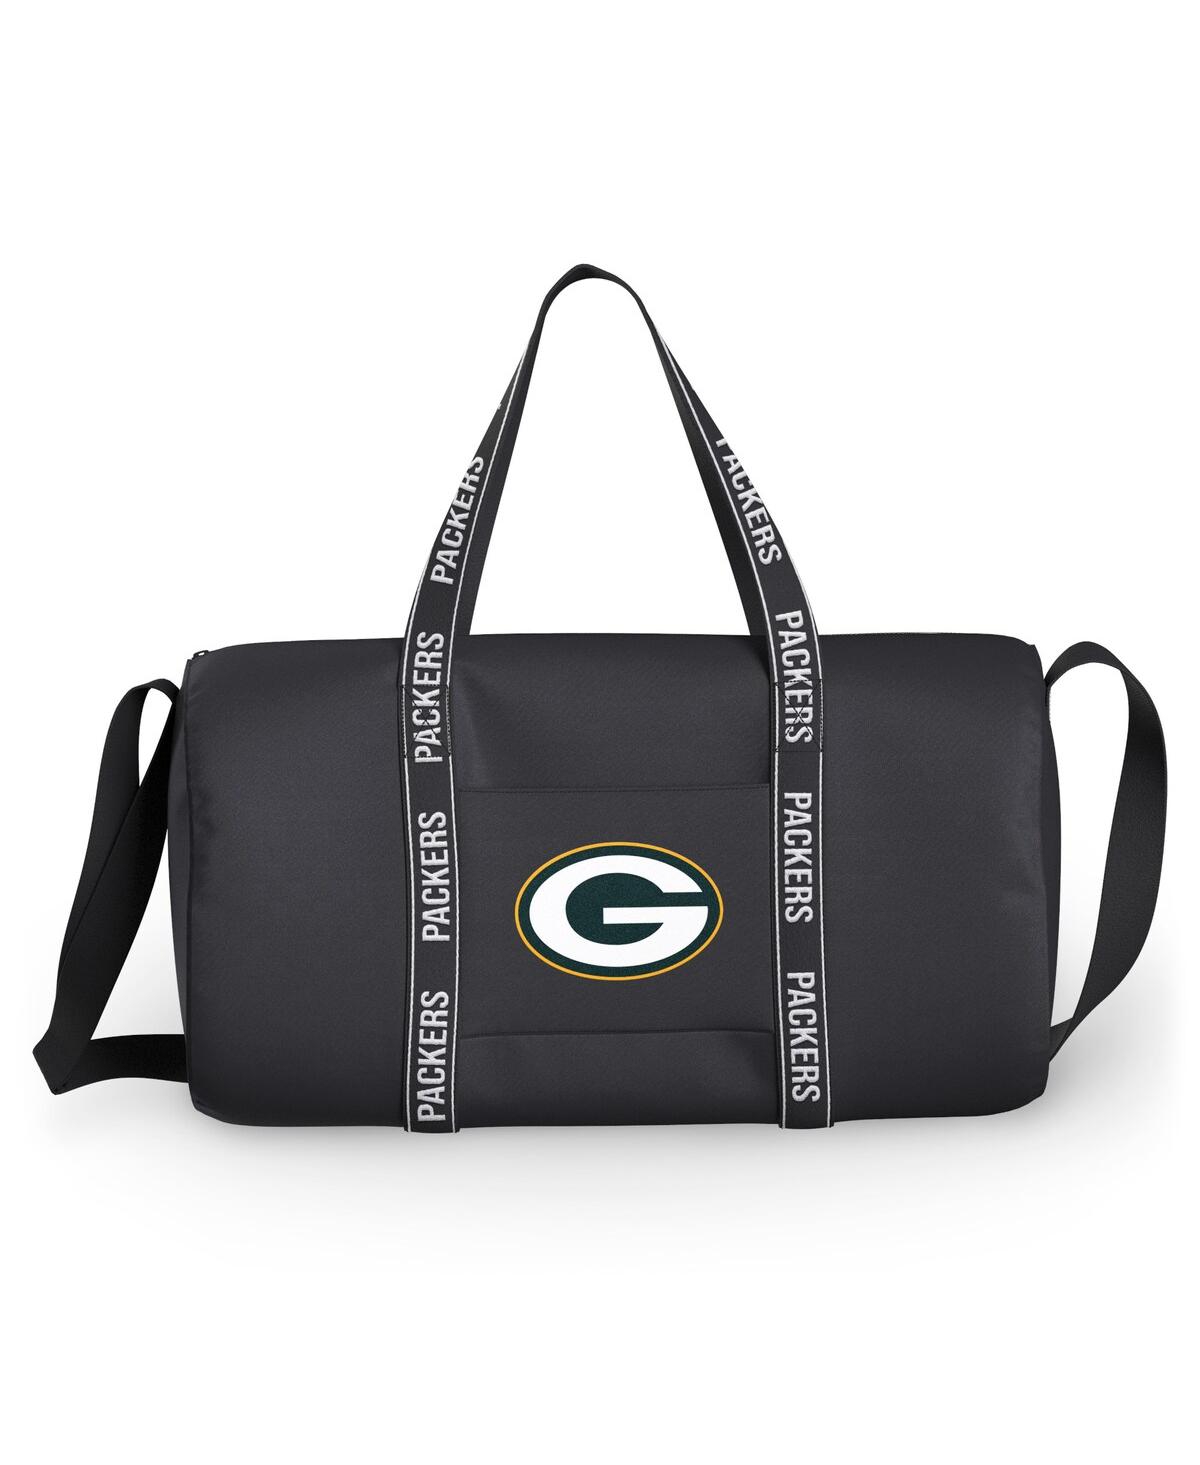 Men's and Women's Wear by Erin Andrews Green Bay Packers Gym Duffle Bag - Black